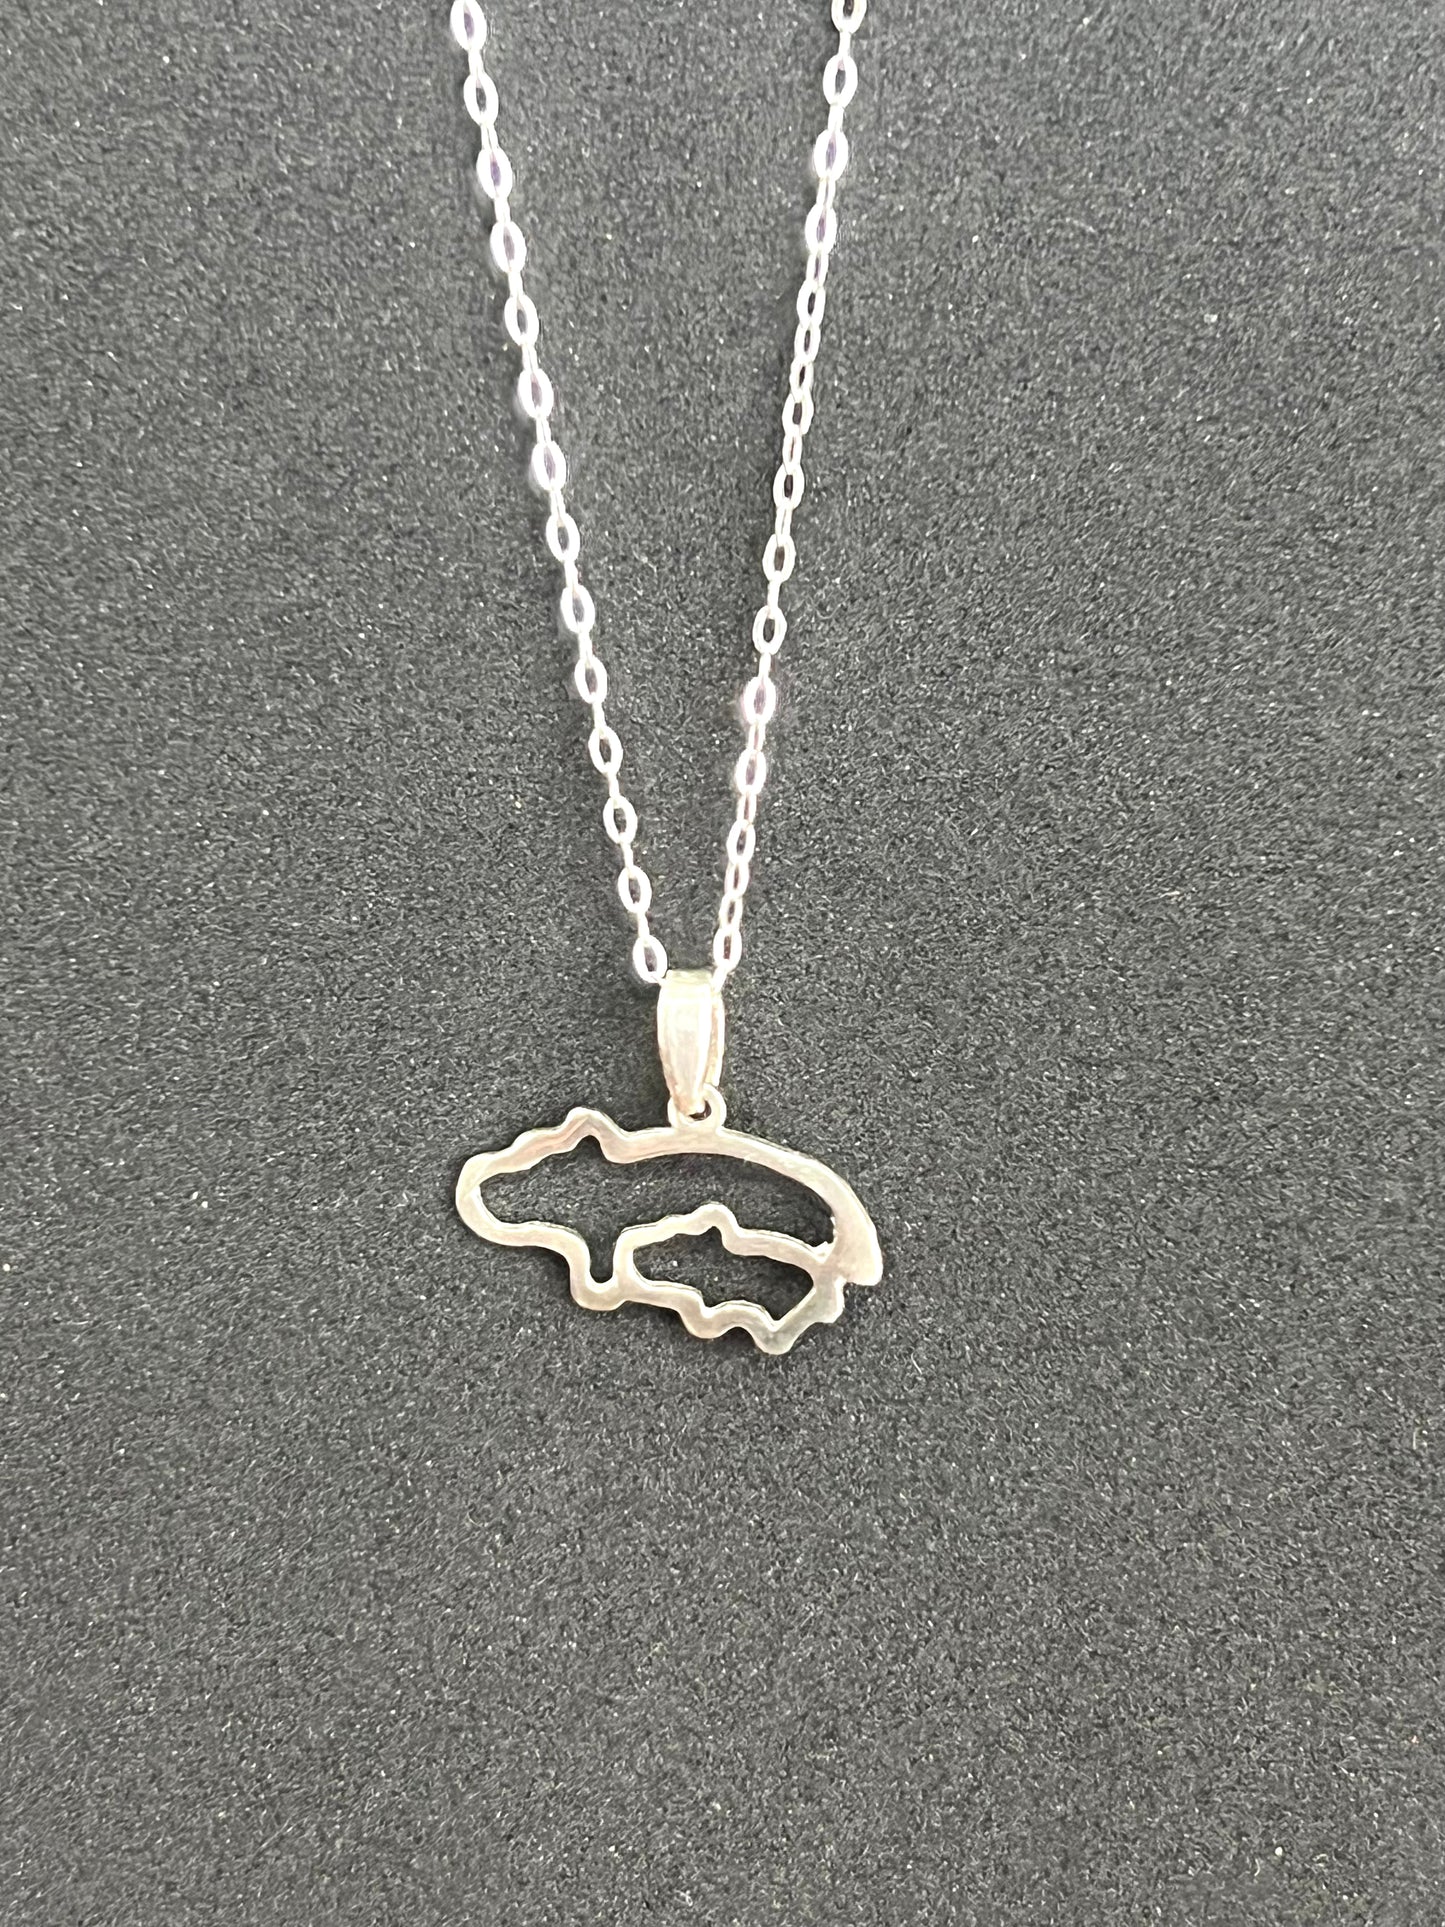 Sterling silver hippo mom and baby necklace